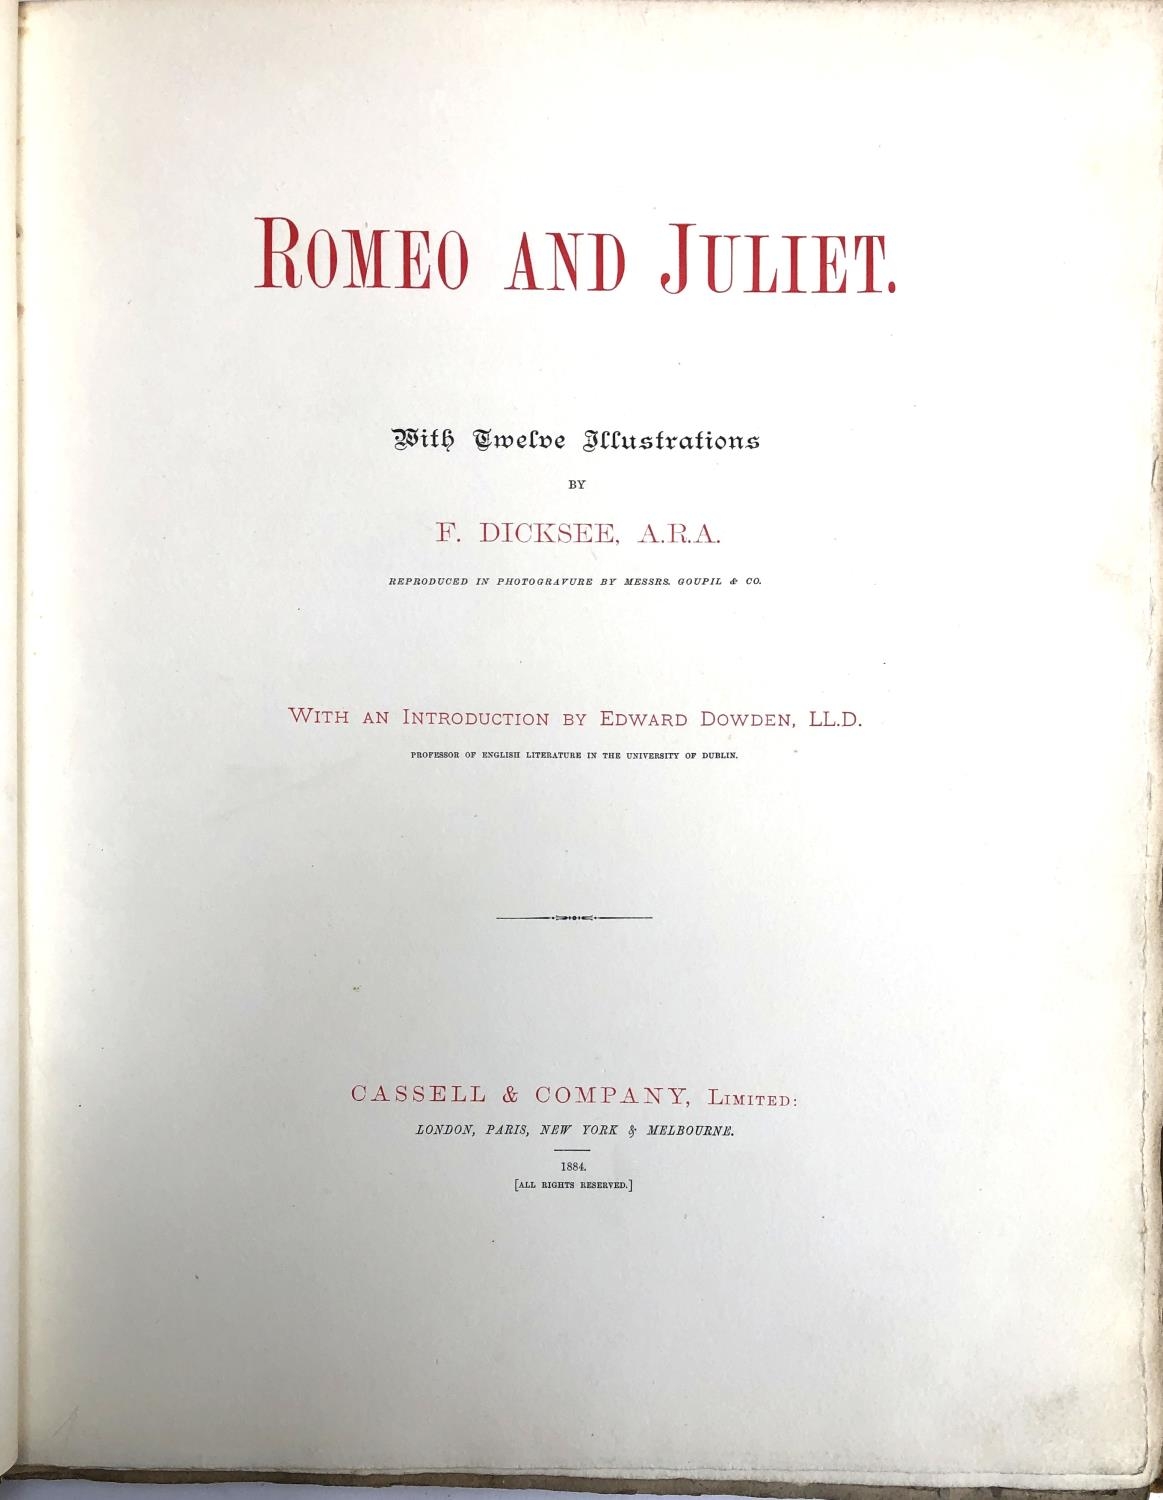 DICKSEE, Frank (illus.), 'Romeo and Juliet' , Cassell and Co., 1884, with twelve illus. in - Image 2 of 3